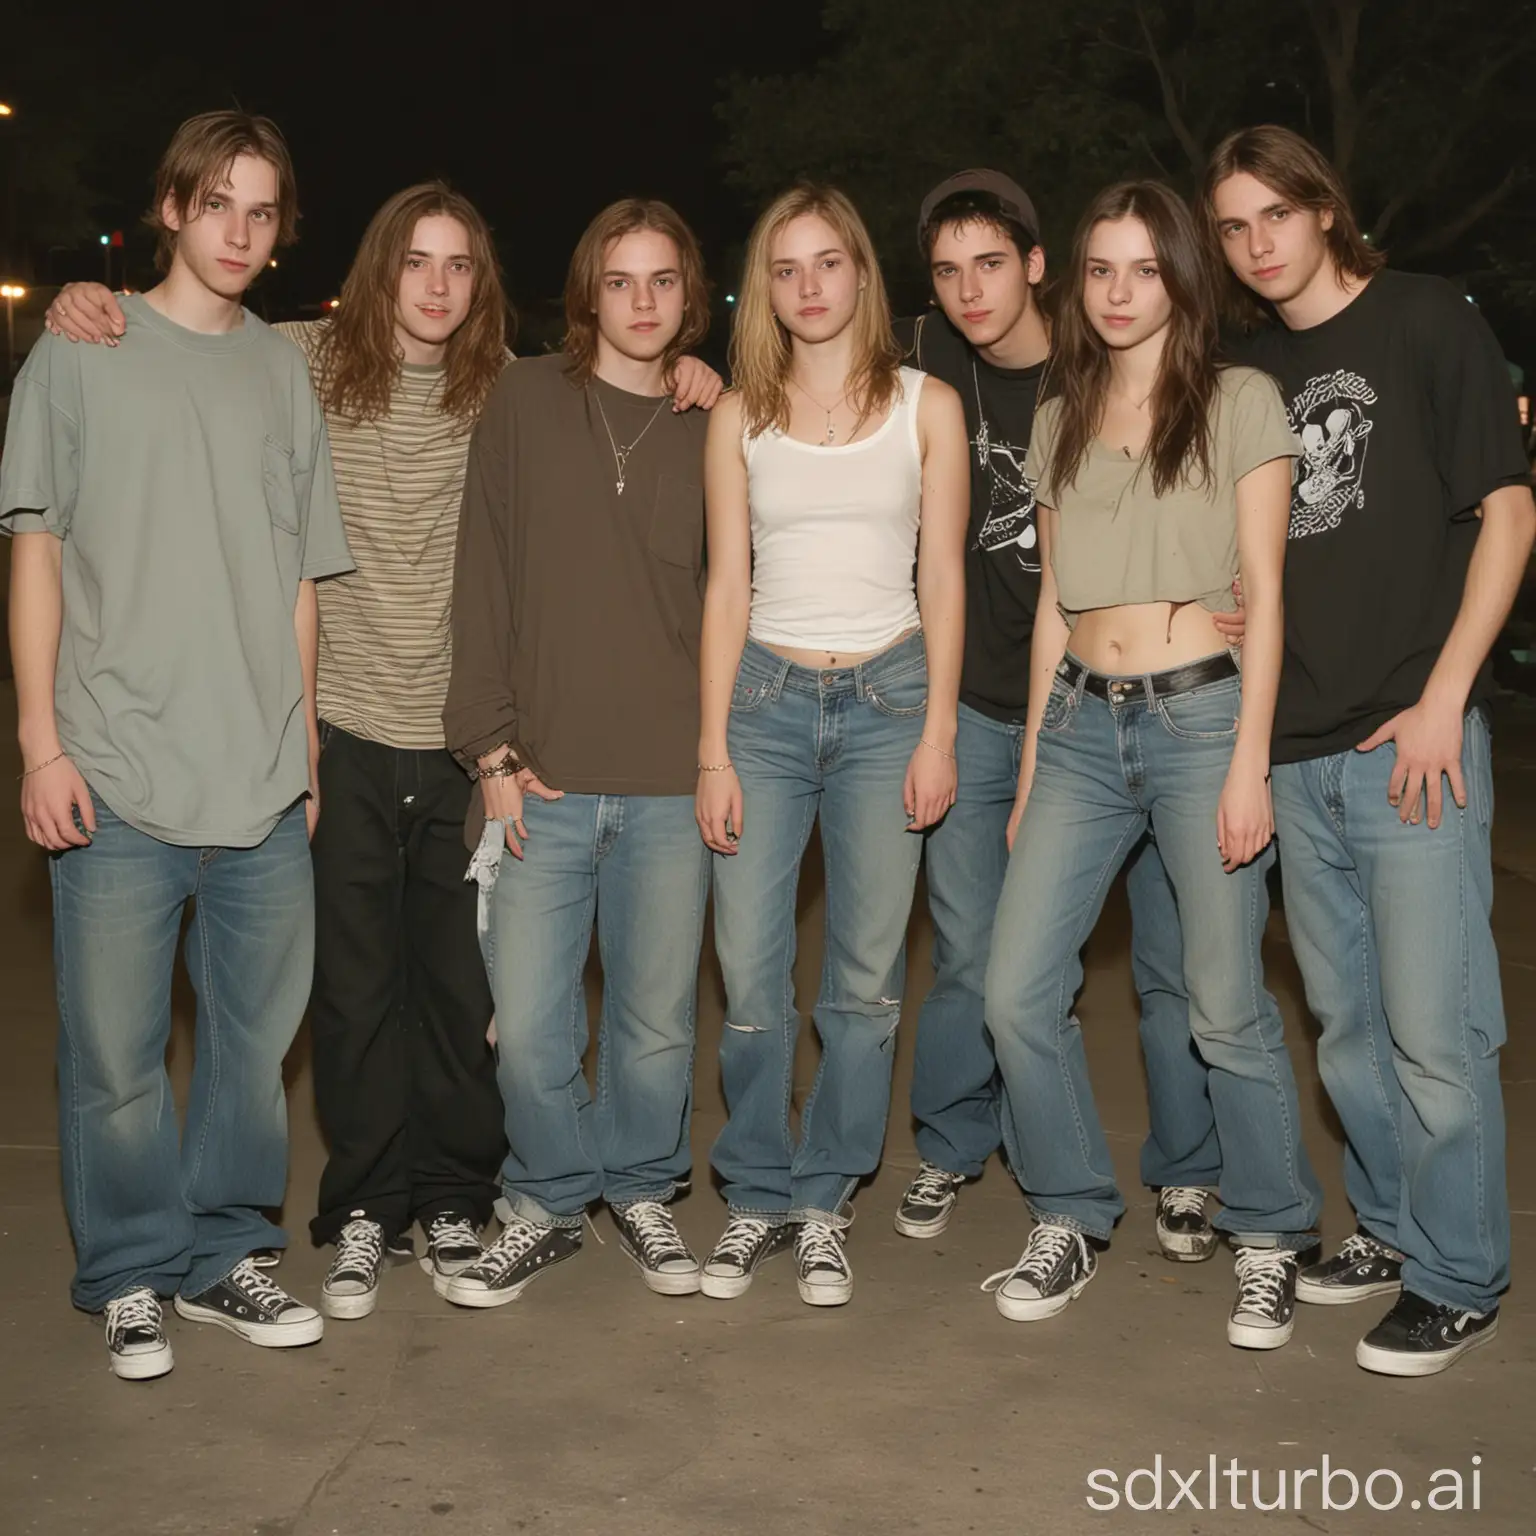 2004 grunge casual outfit, full body, young adults in their 20s, candid, photo, muted colors, earthly tones, baggy, skater, standing, jpg, nighttime, group photo